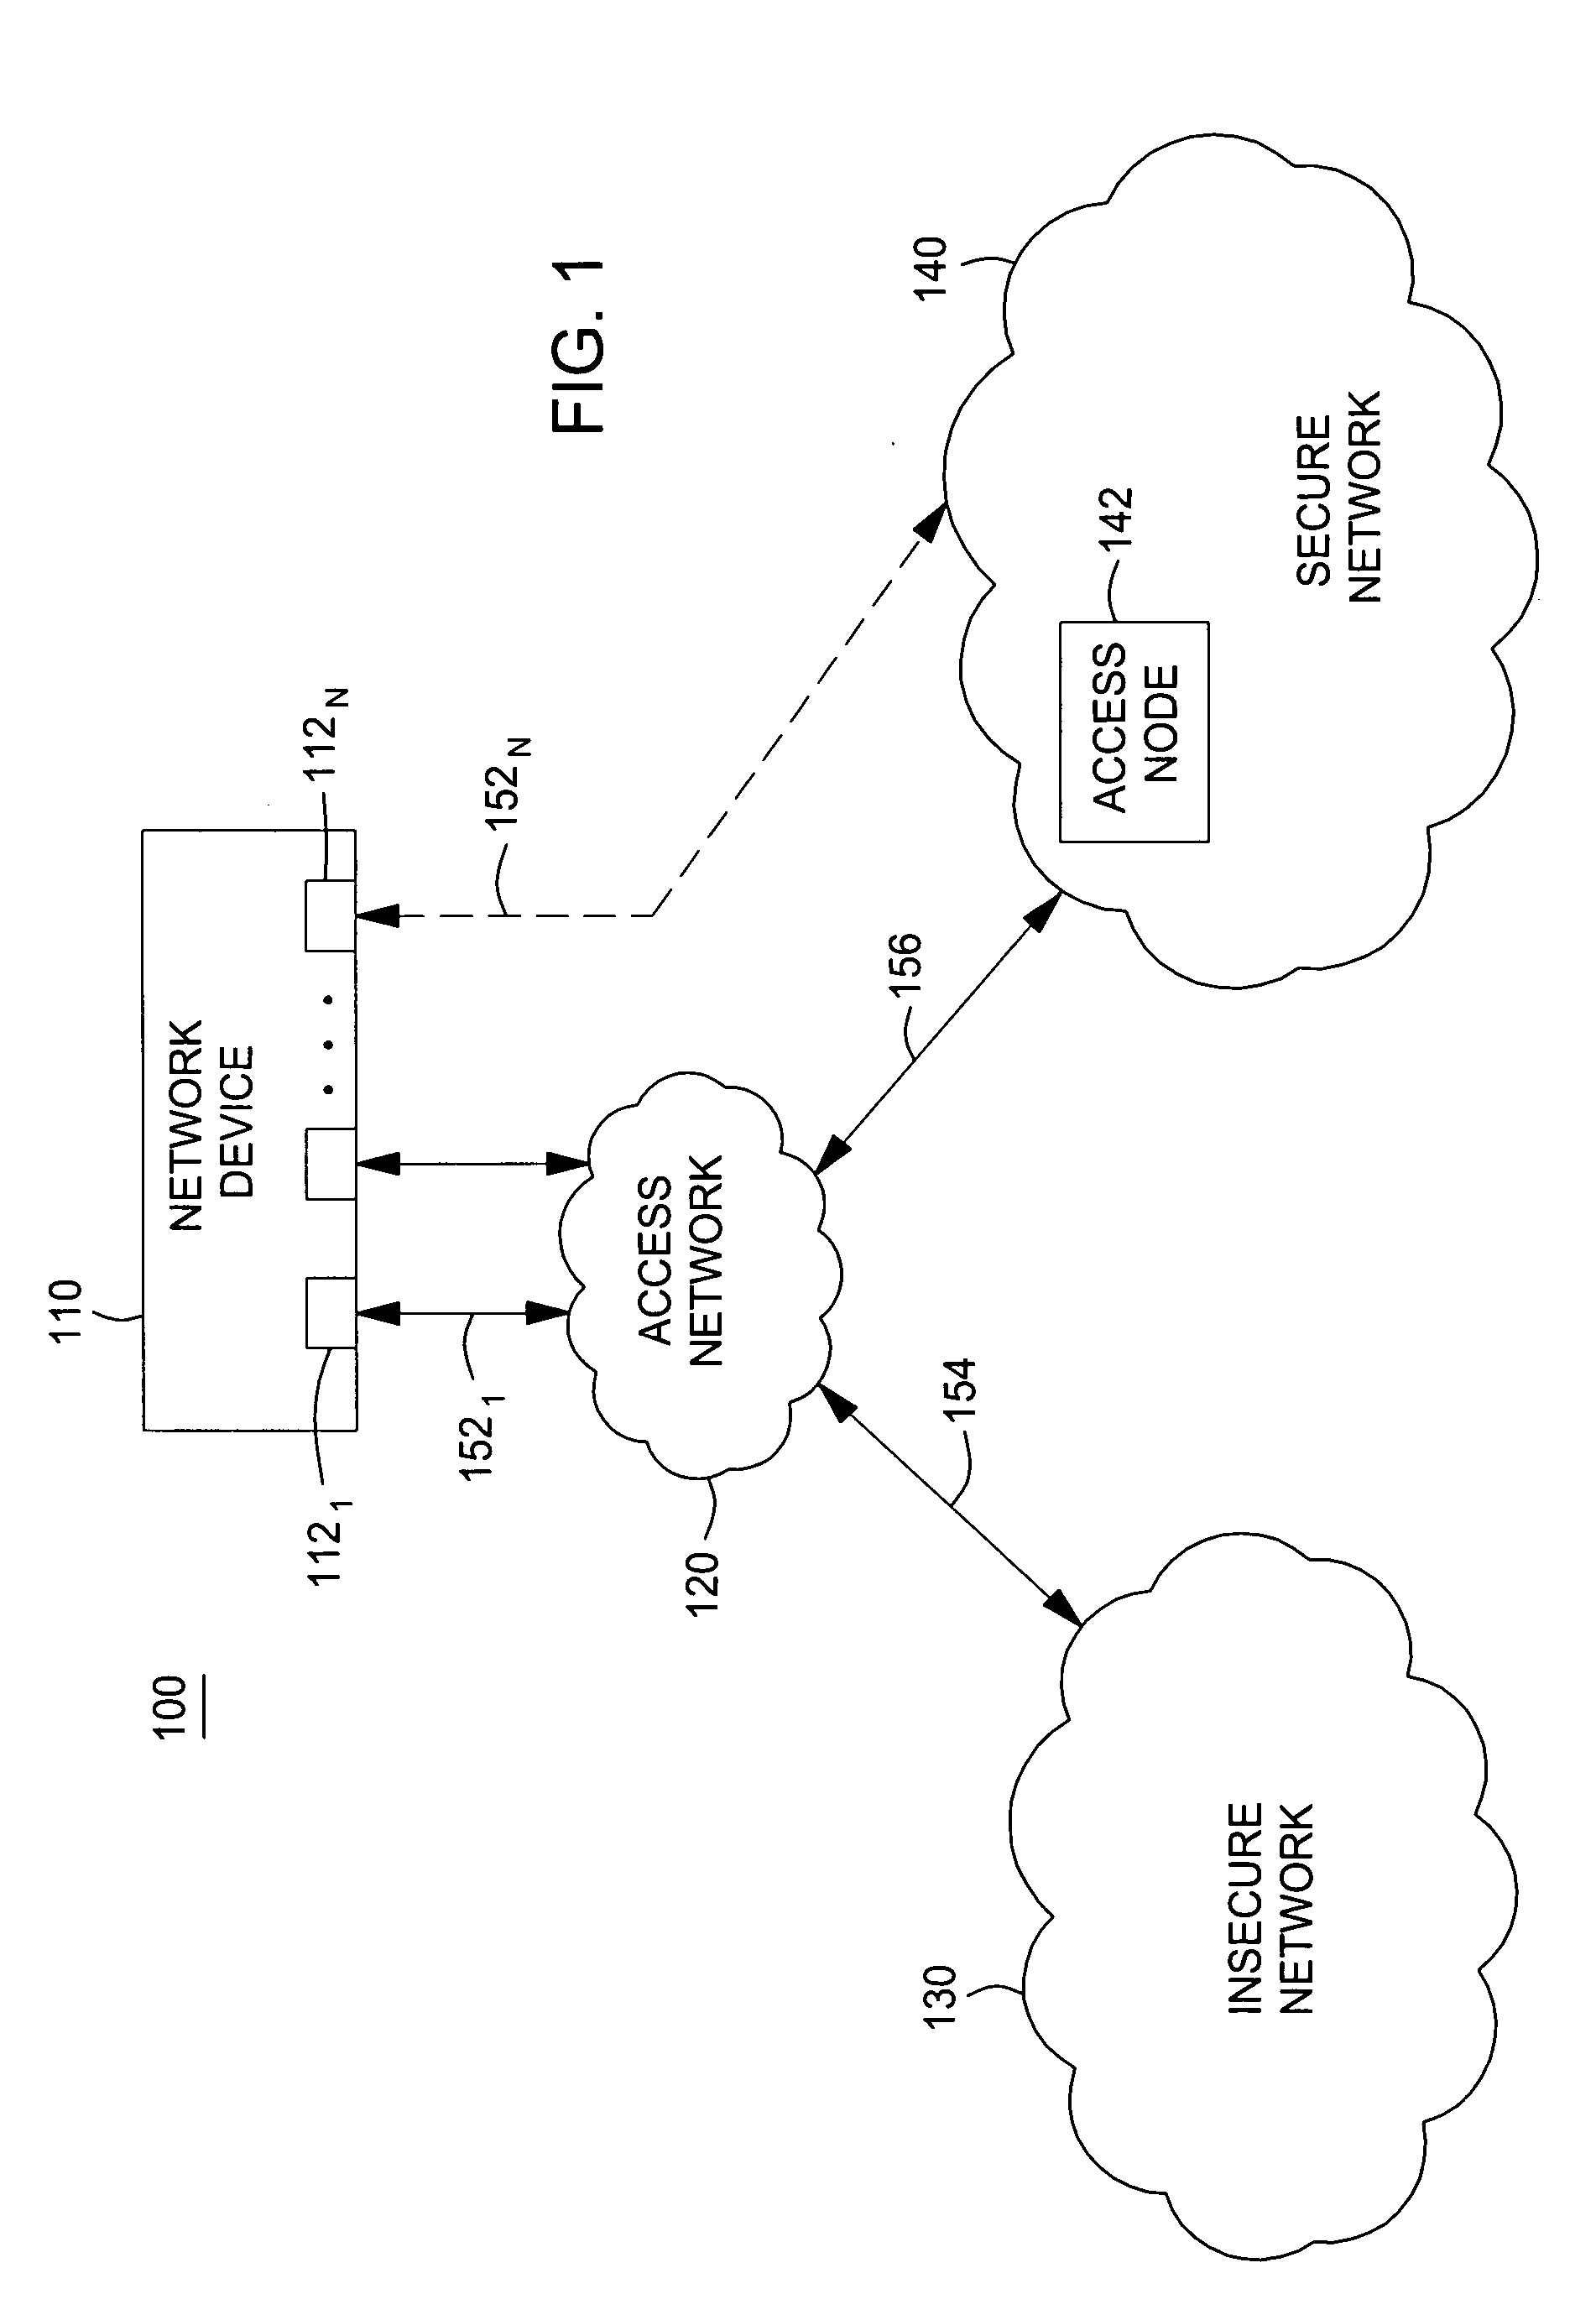 Method and apparatus for preventing bridging of secure networks and insecure networks